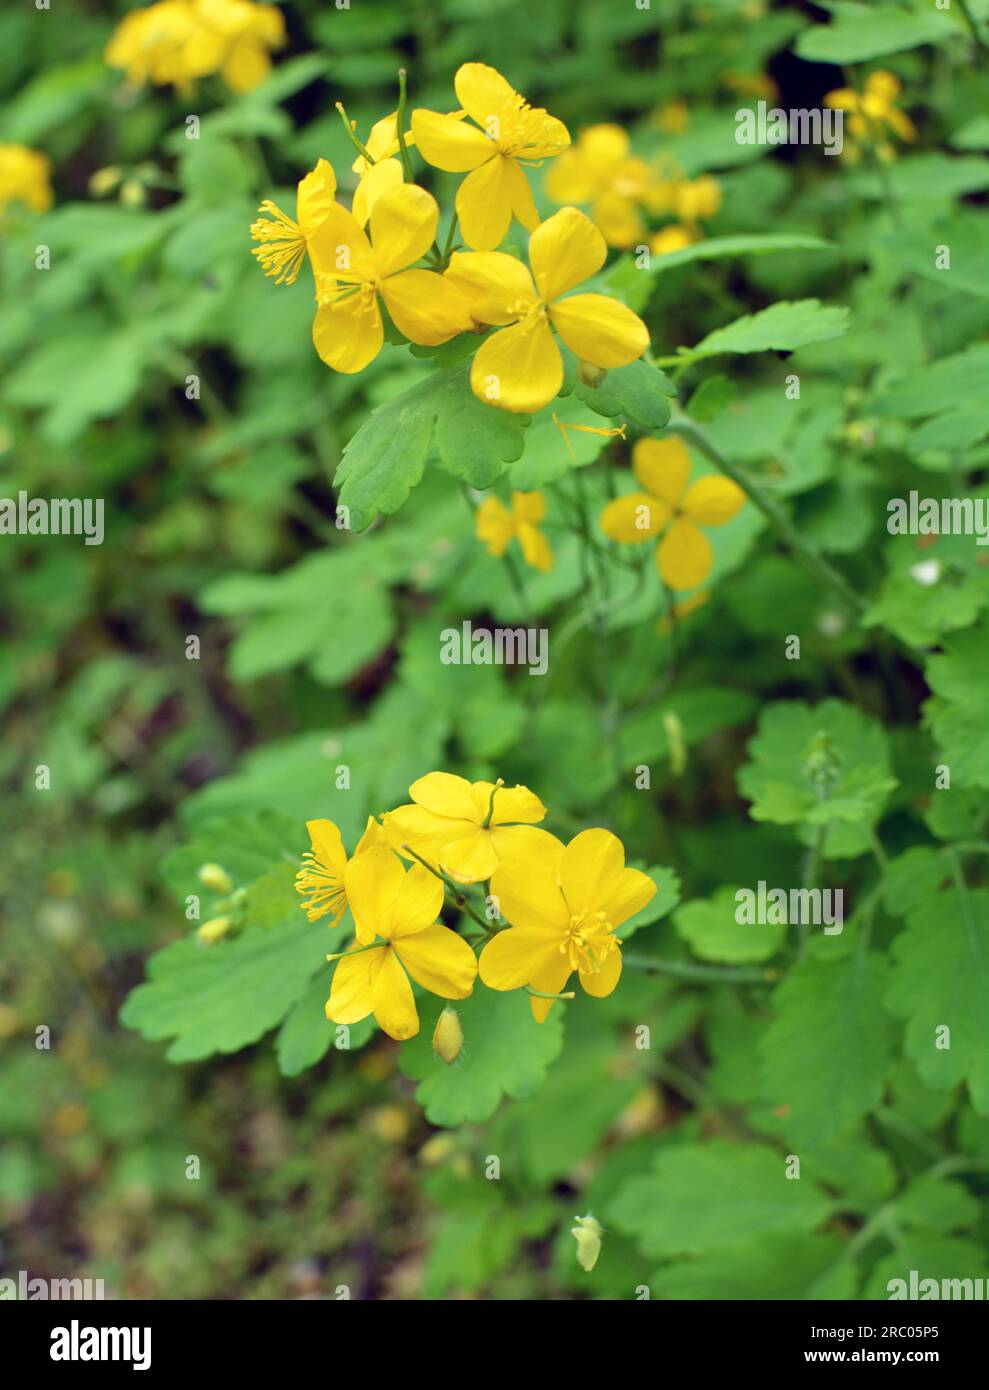 Chelidonium majus with leaves and yellow flowers, growing in the wild Stock Photo